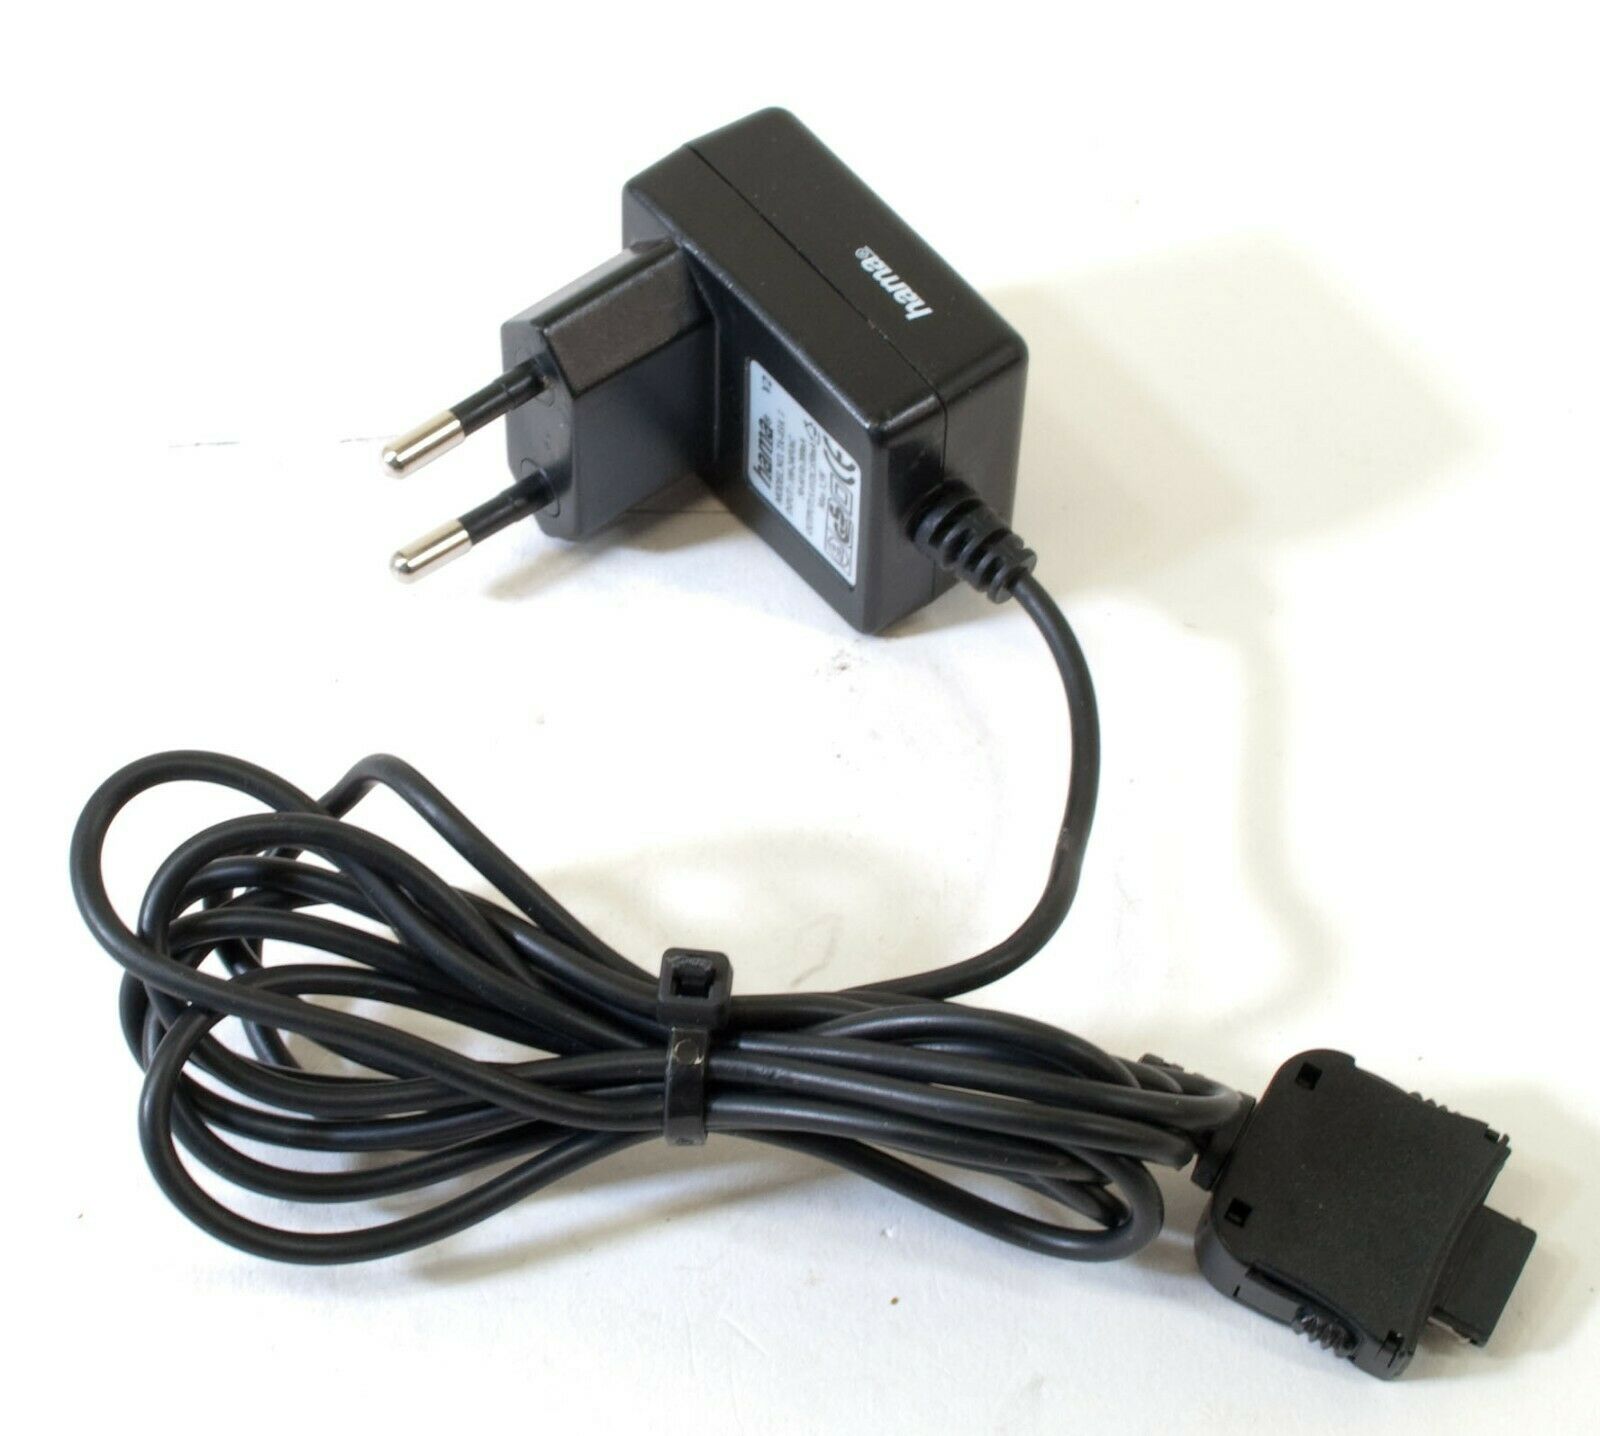 Hama TA-03A 1 AC Adapter 5.4V 650mA Original Charger Power Supply Output Current: 650 mA Voltage: 5.4 V MPN: TA-03A 1 T